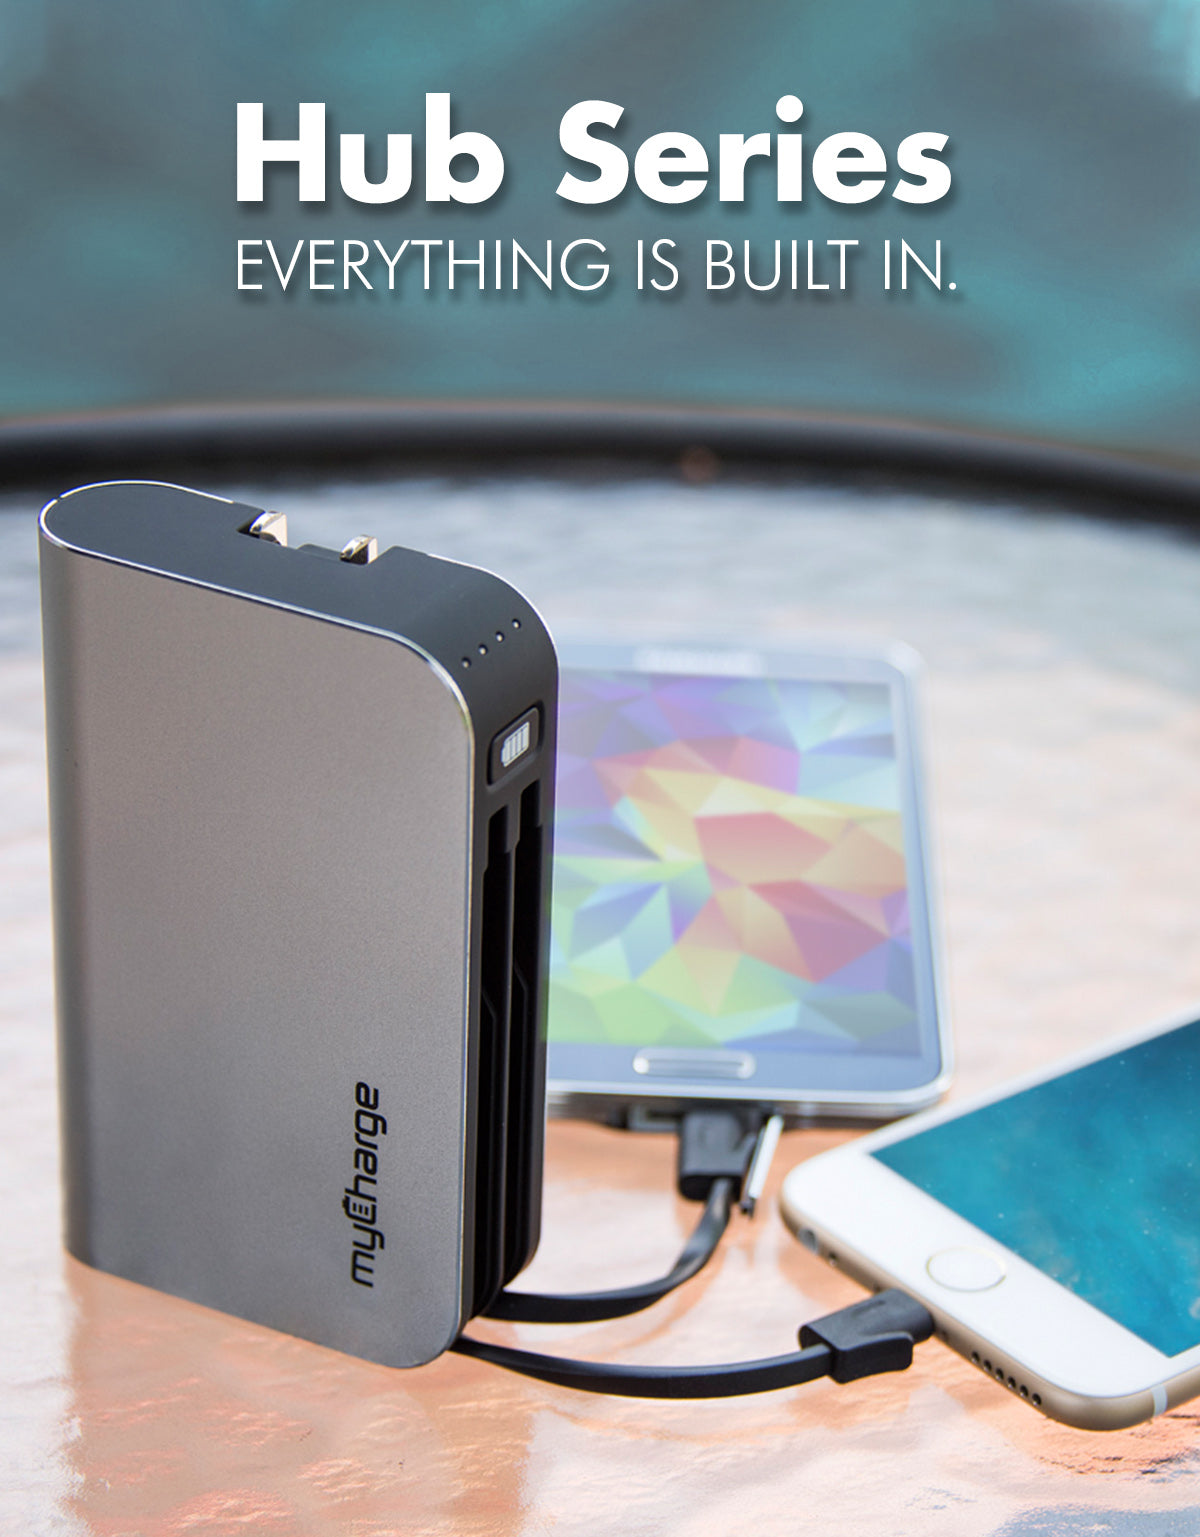 myCharge, The Ultimate in Portable Power Solutions